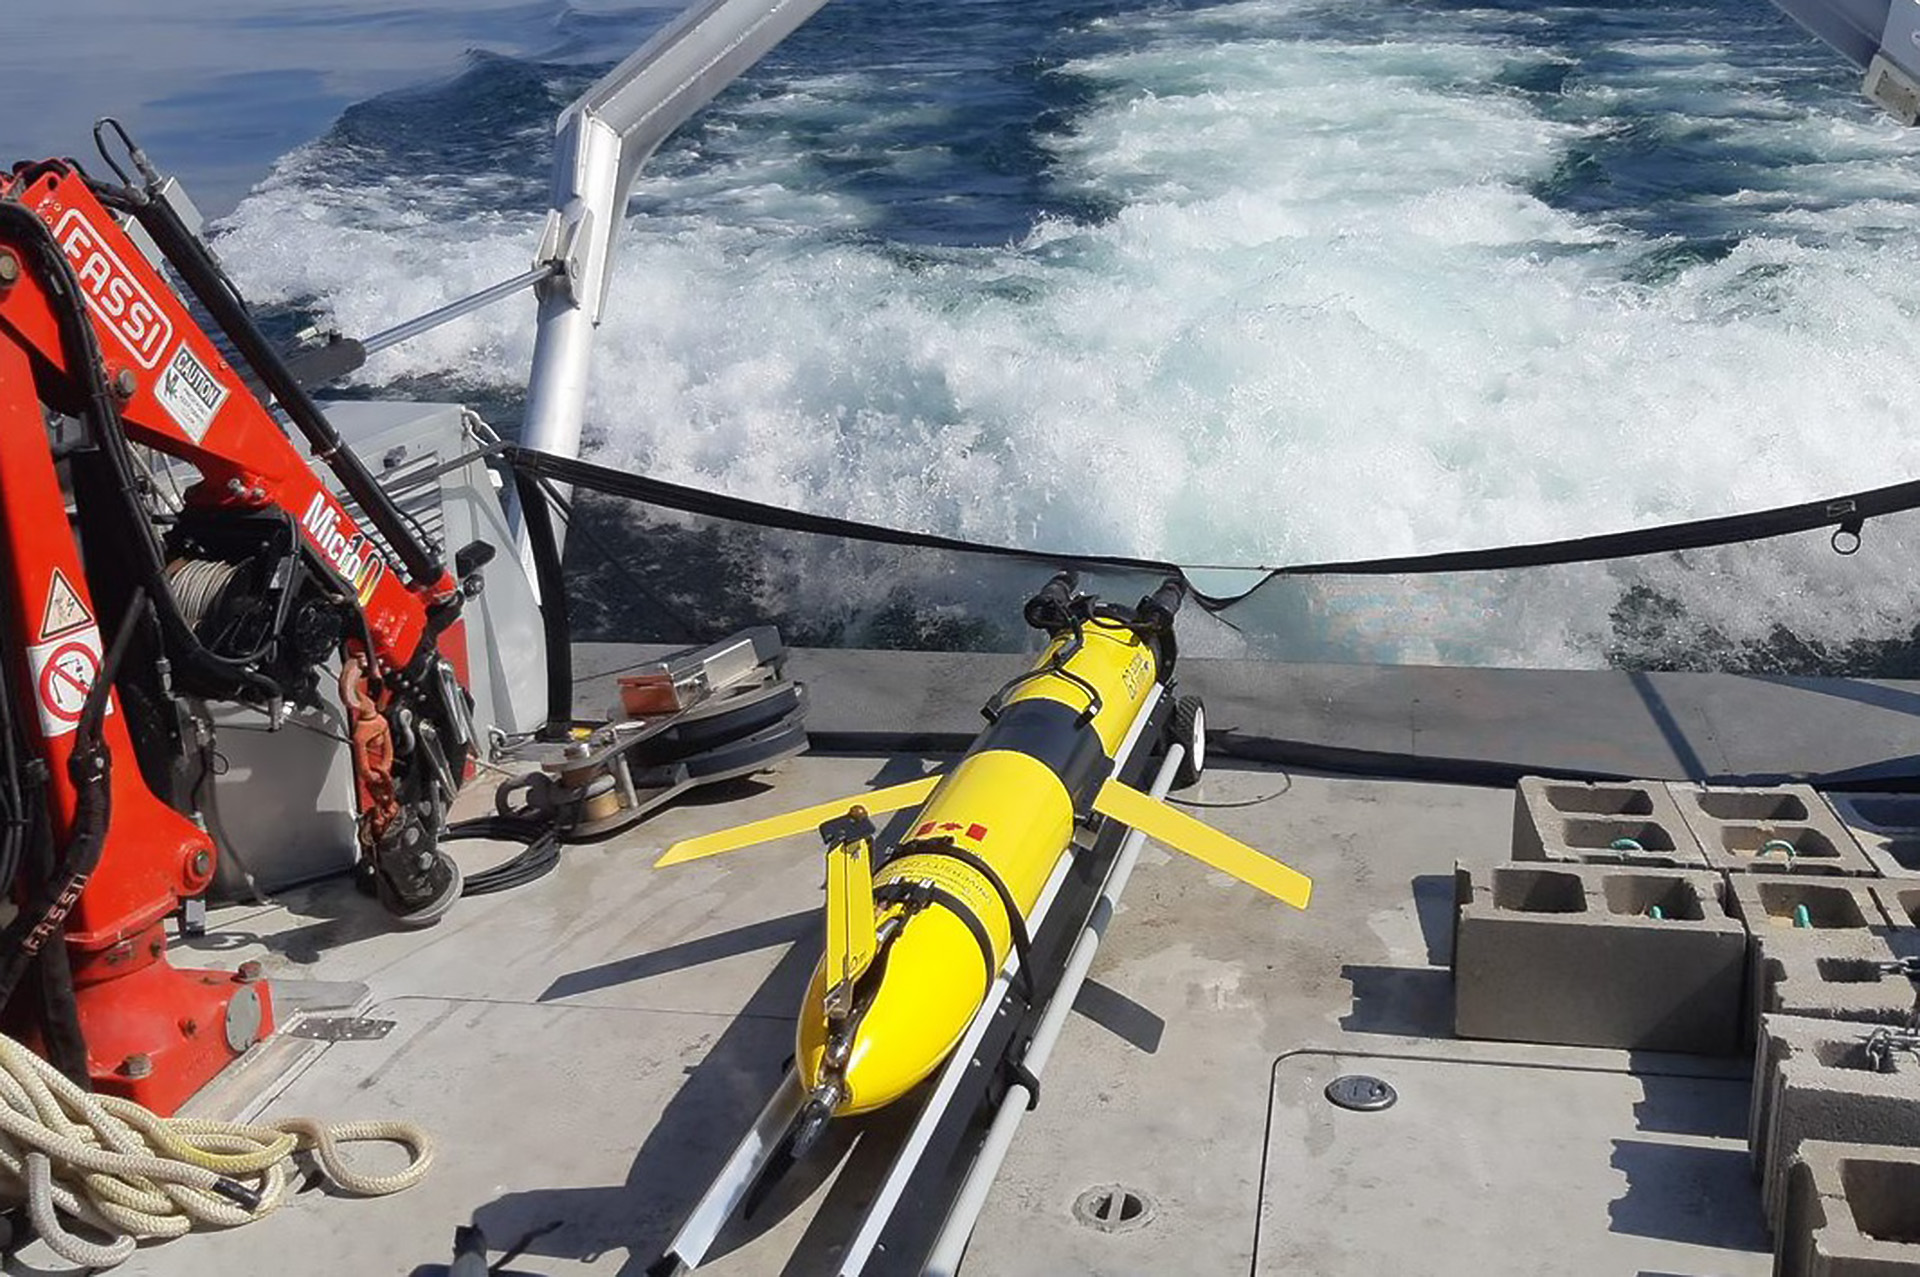 Above: RAEON’s Slocum glider, Sturgeon, on DFO’s research vessel, Cisco. Image: Department of Fisheries and Oceans. Inset: Trans